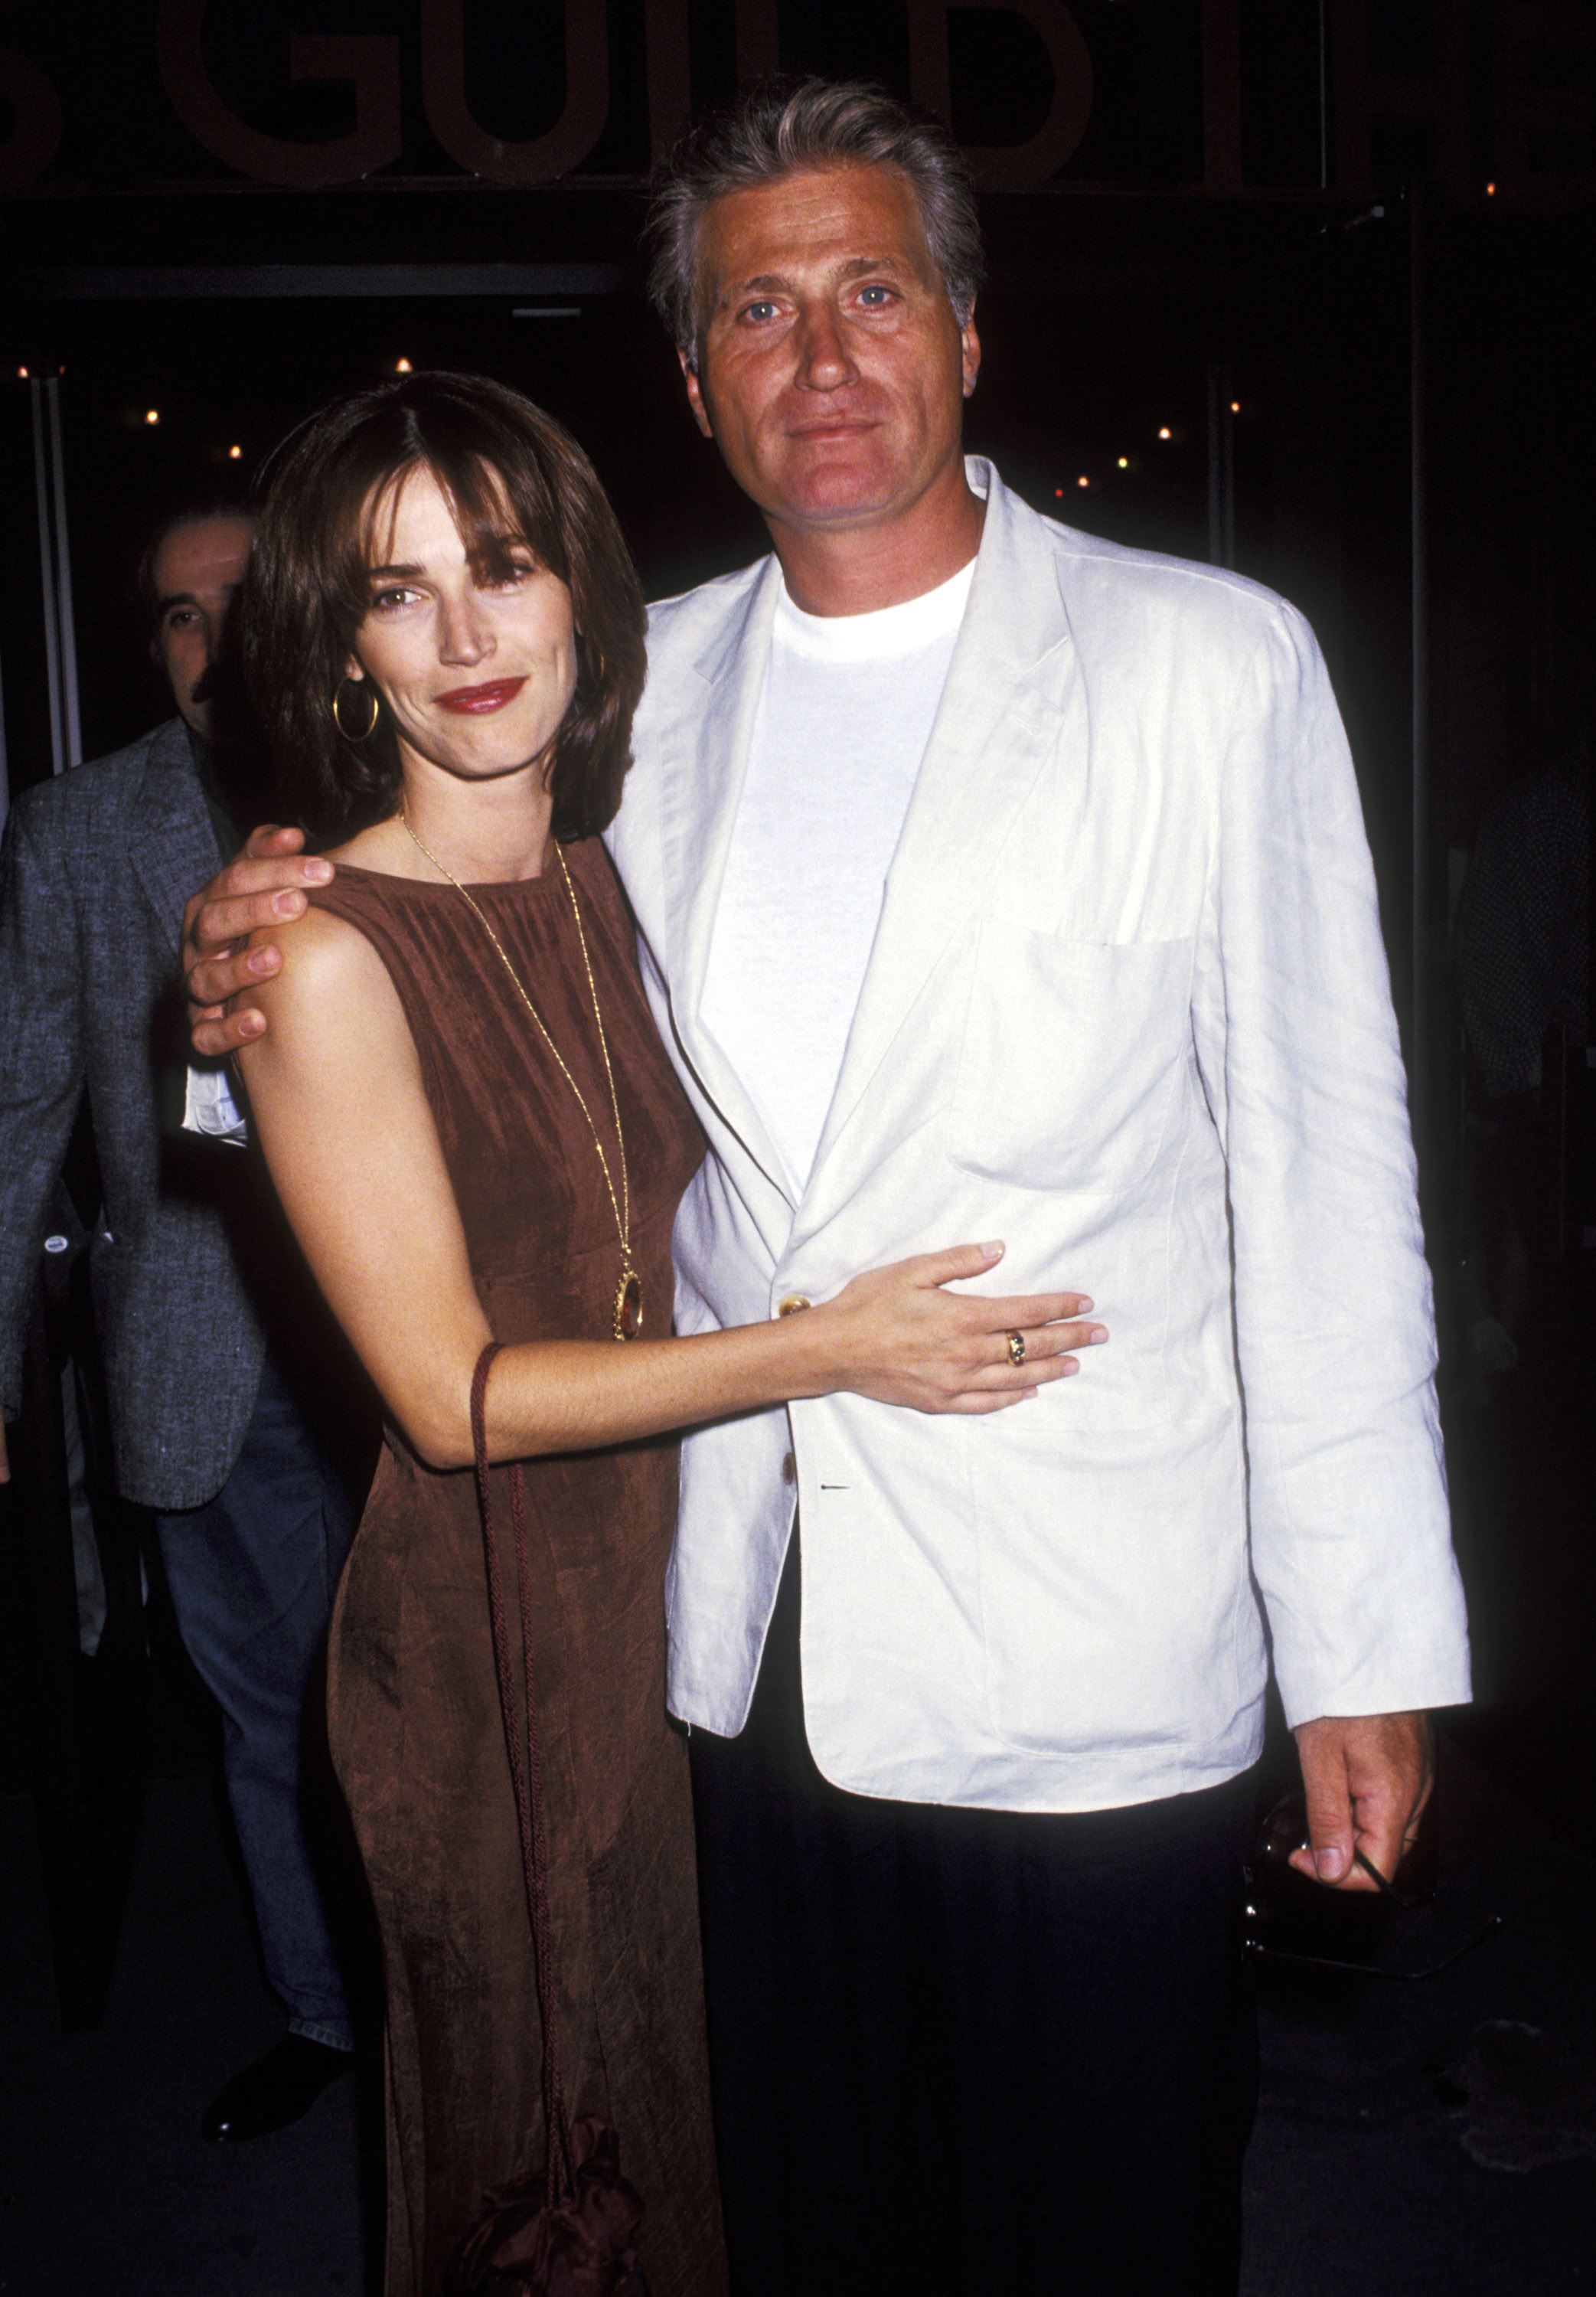 Kim Delaney and Joe Cortese during the premiere of "Born to Run" in Beverly Hills, California, on July 22, 1993 | Source: Getty Images